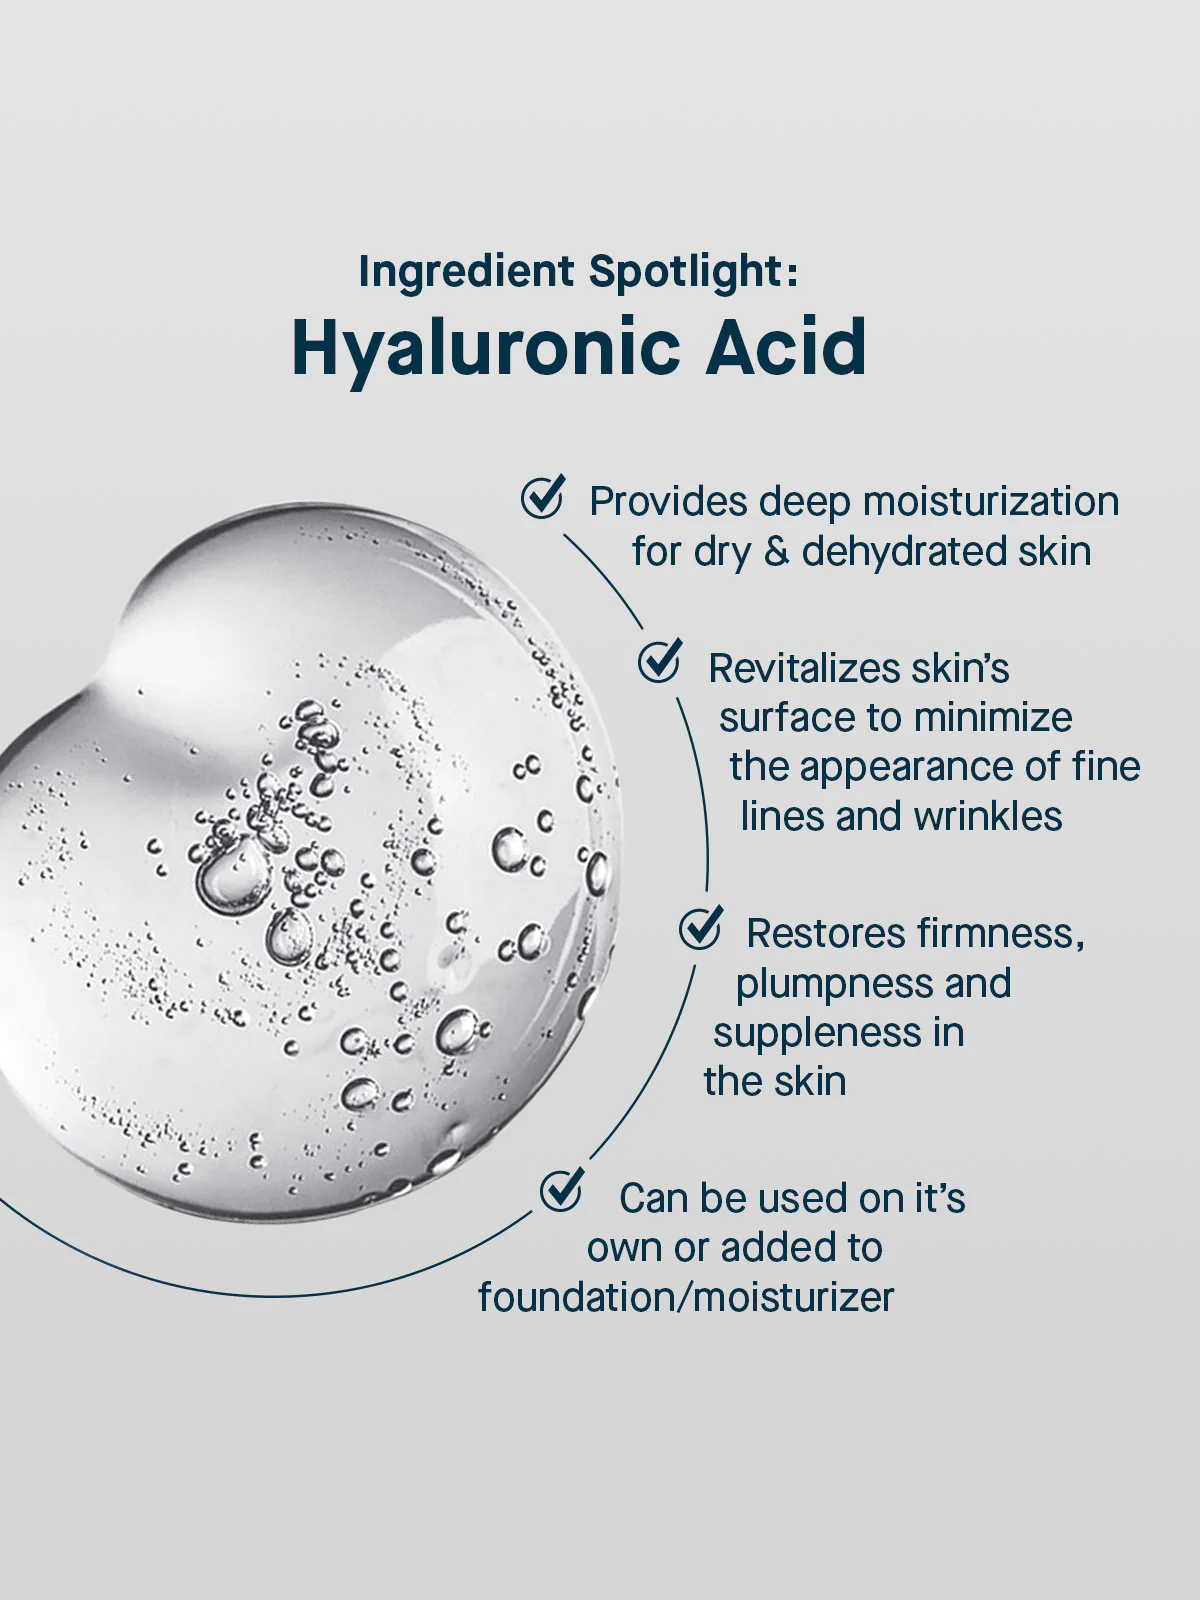 Does Hyaluronic Acid Fade Microblading?